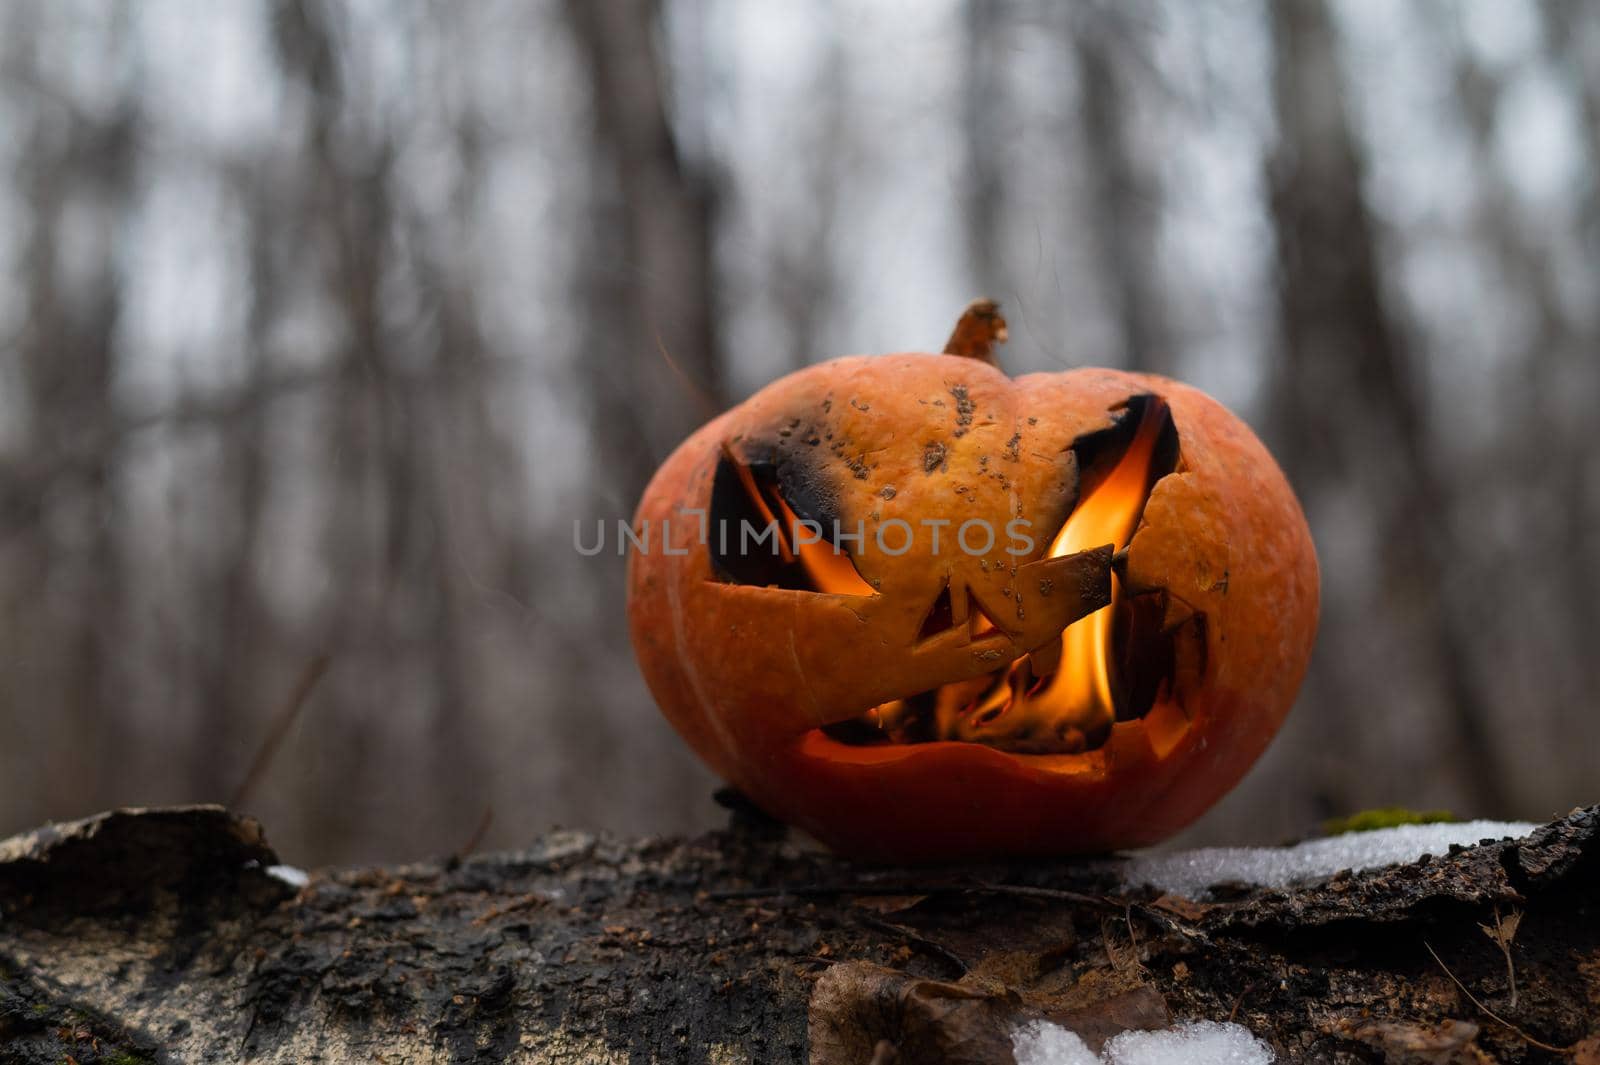 Scary pumpkin with tongues of flame in a dense forest. Jack o lantern for halloween.